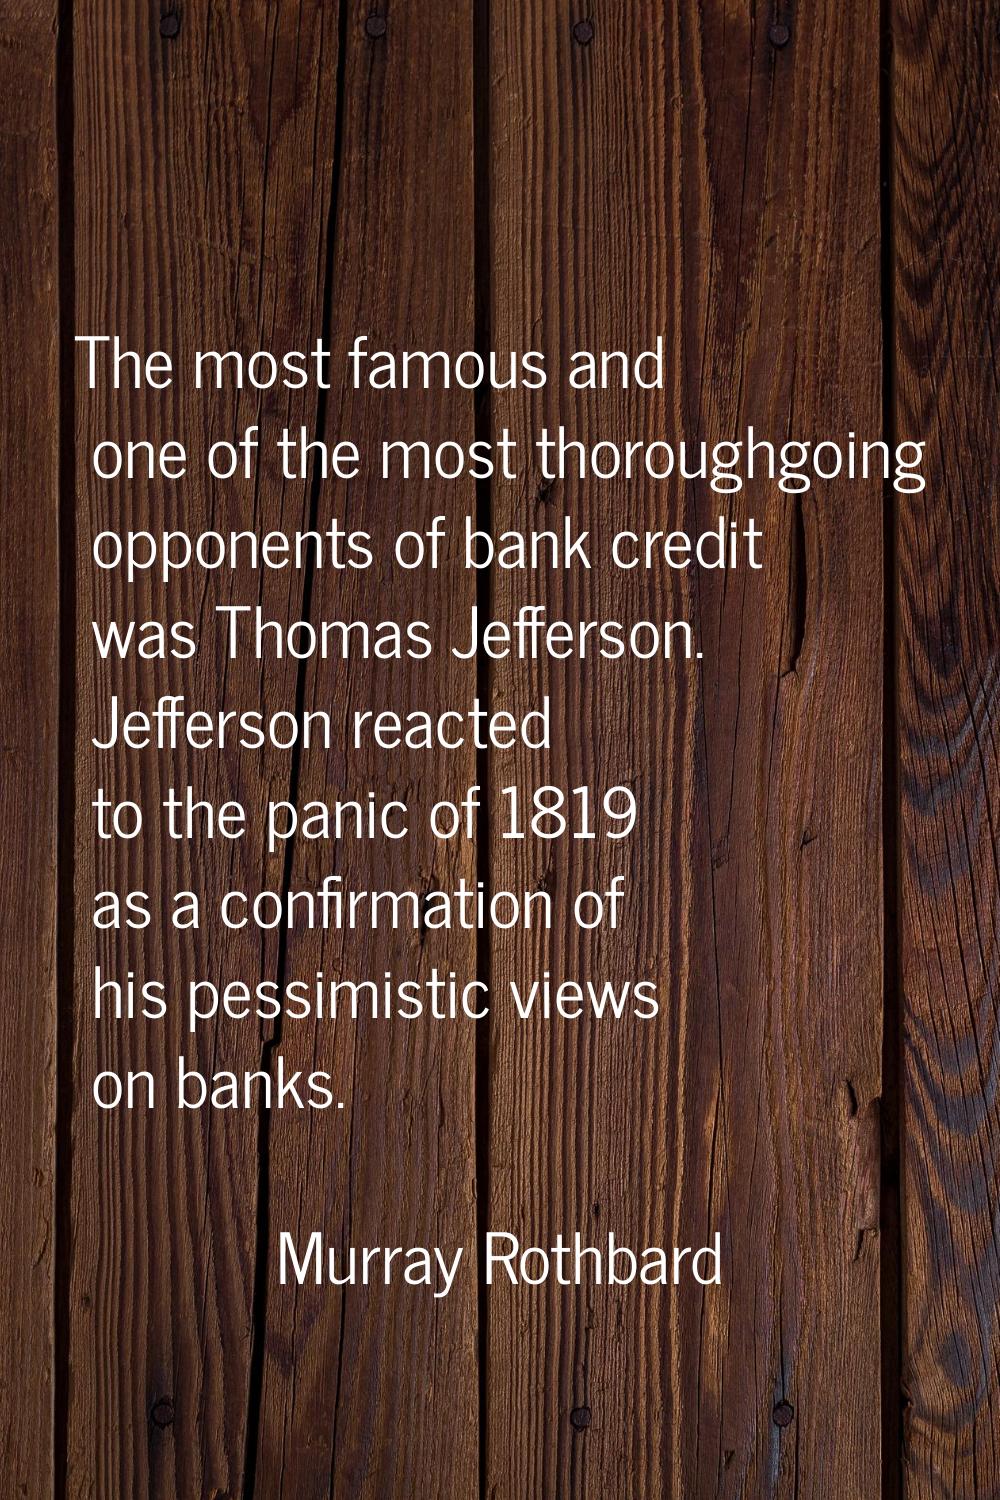 The most famous and one of the most thoroughgoing opponents of bank credit was Thomas Jefferson. Je